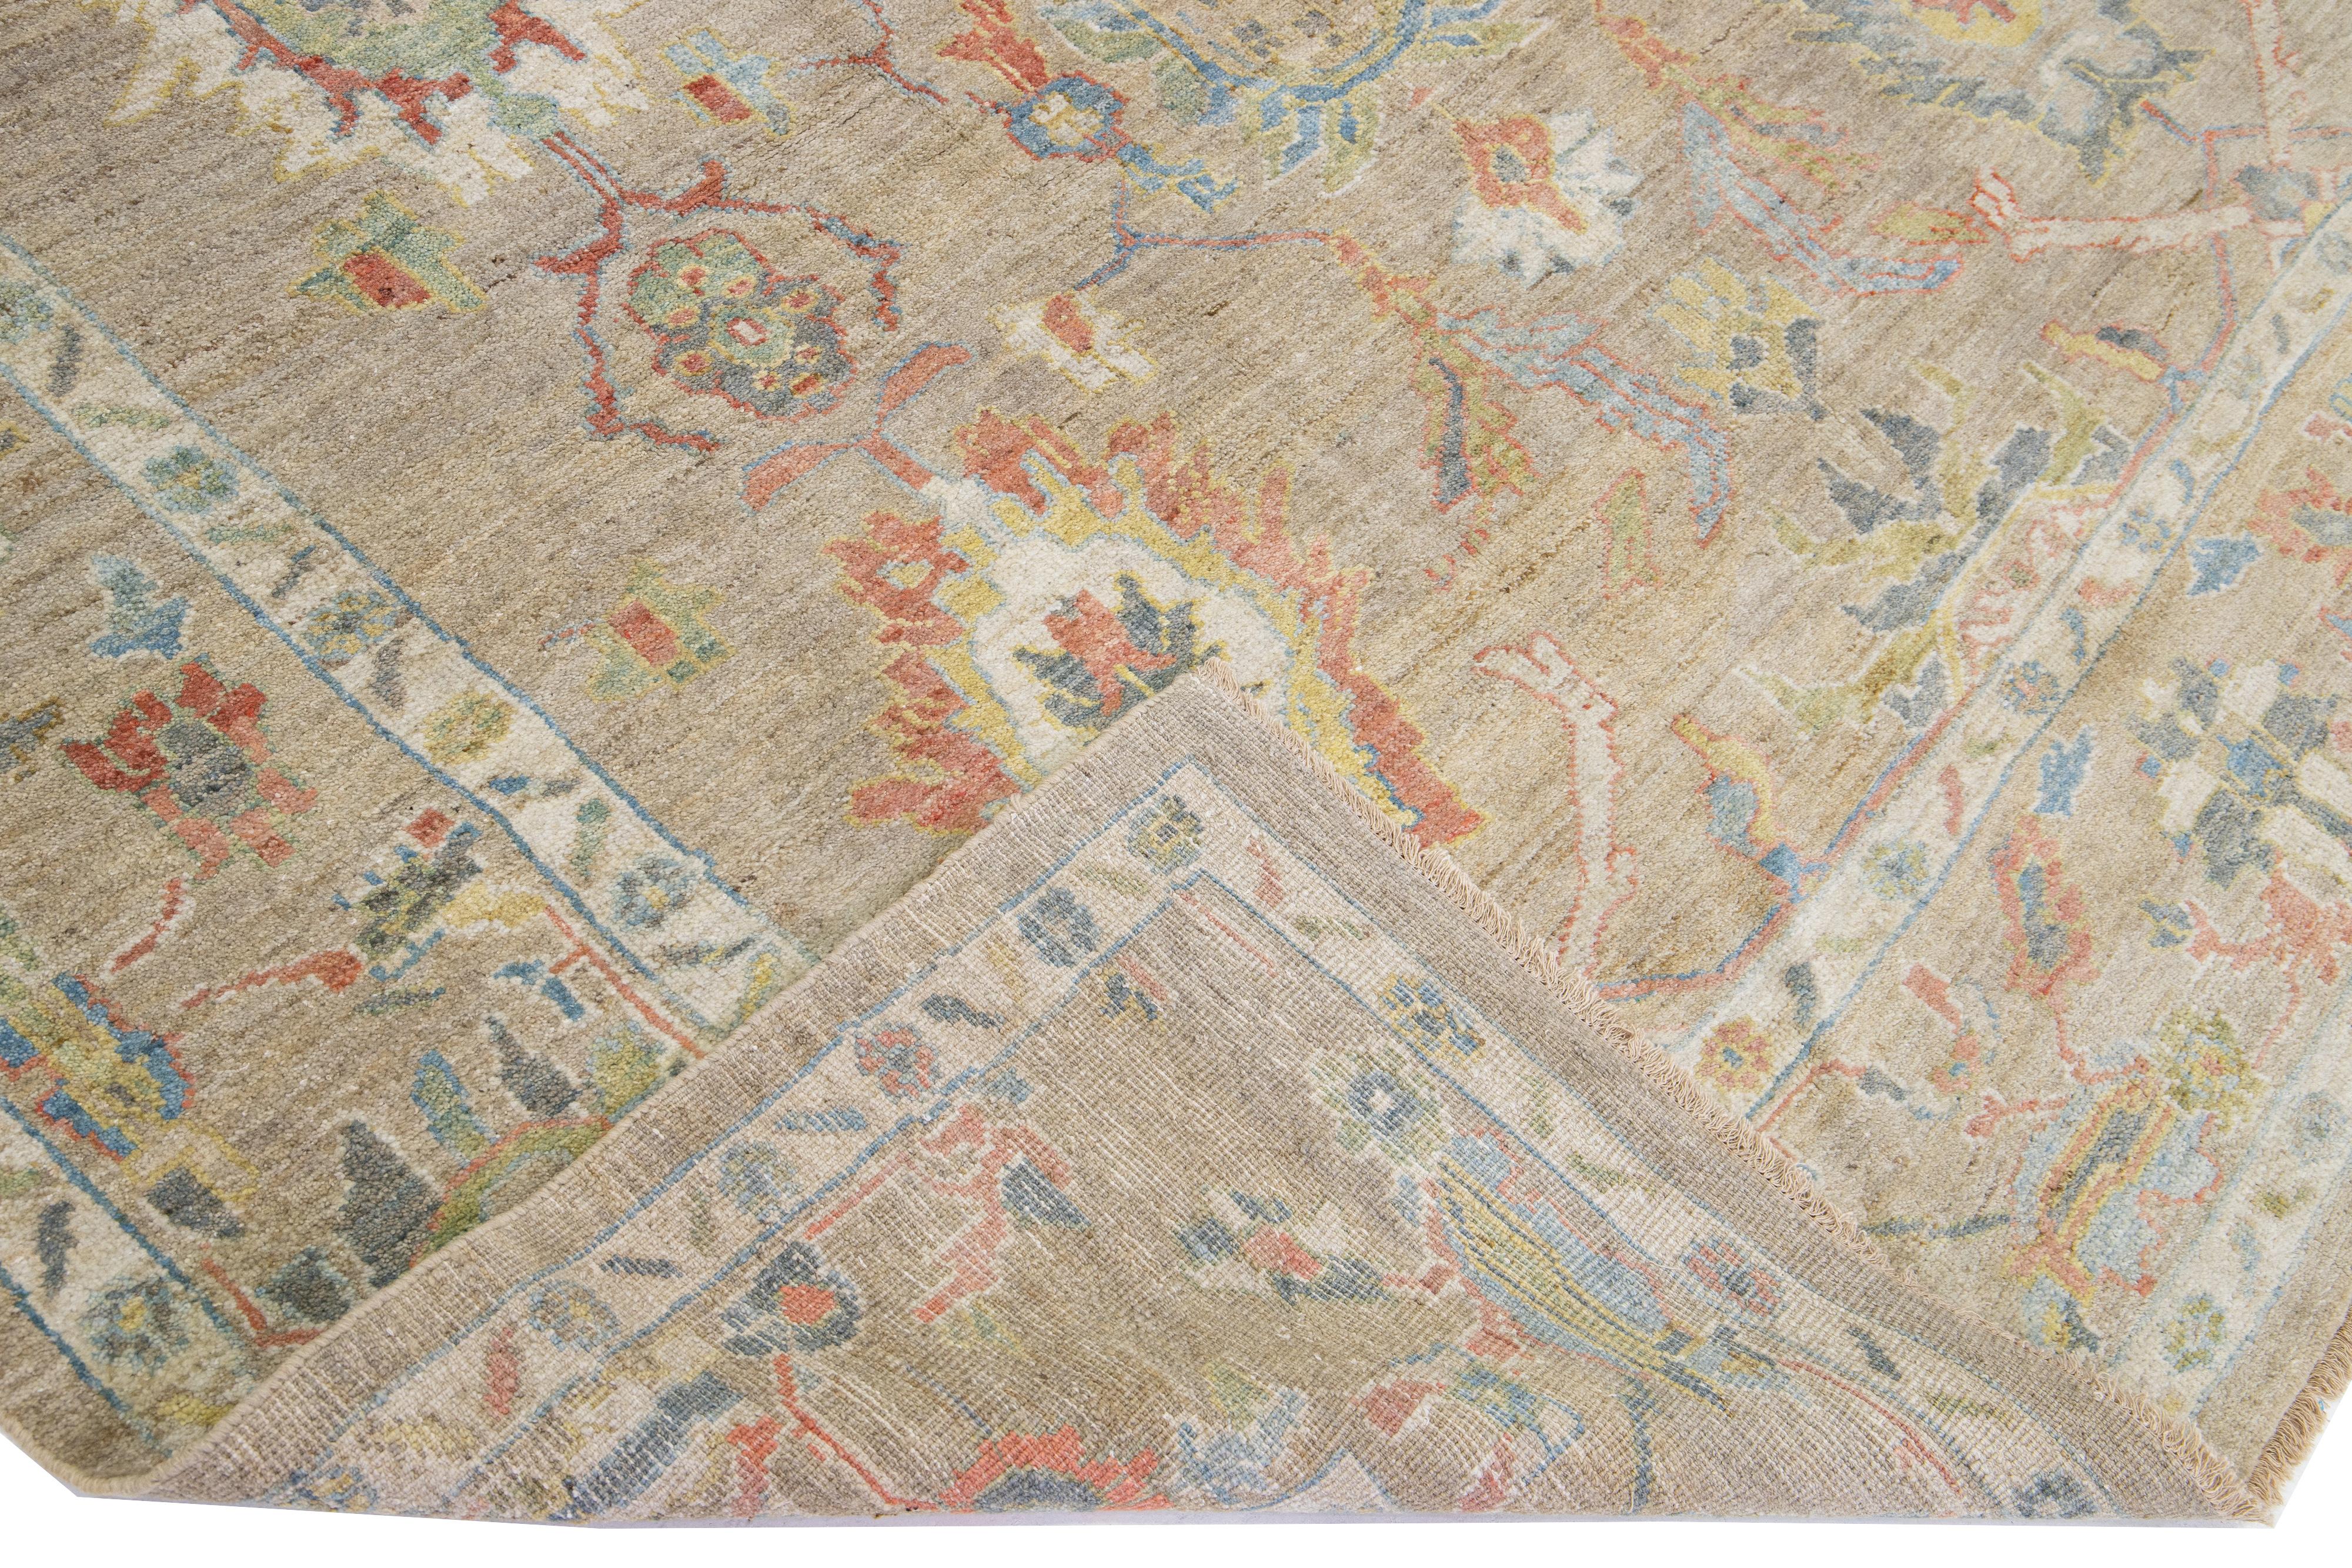 Beautiful modern Sultanabad hand-knotted wool rug with a brown color field. This rug has red, yellow, and green accents in a gorgeous all-over floral design.

This rug measures: 8'5